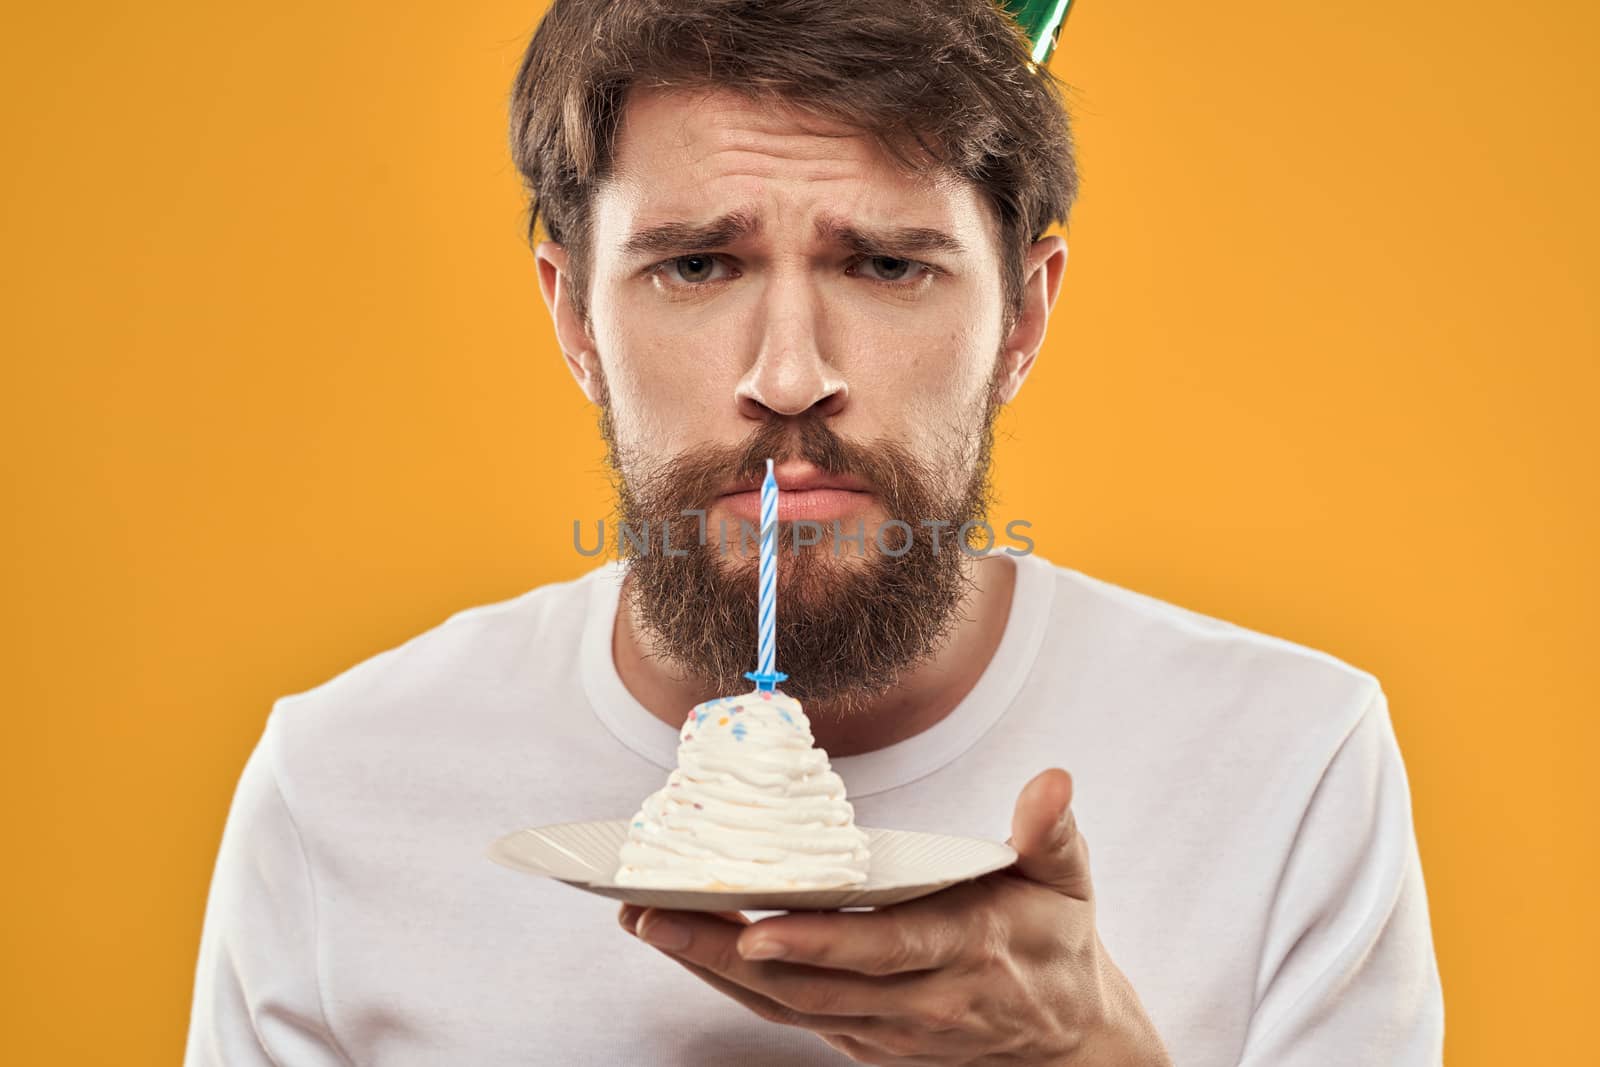 Handsome man with a beard and in a cap celebrating a birthday party yellow background by SHOTPRIME